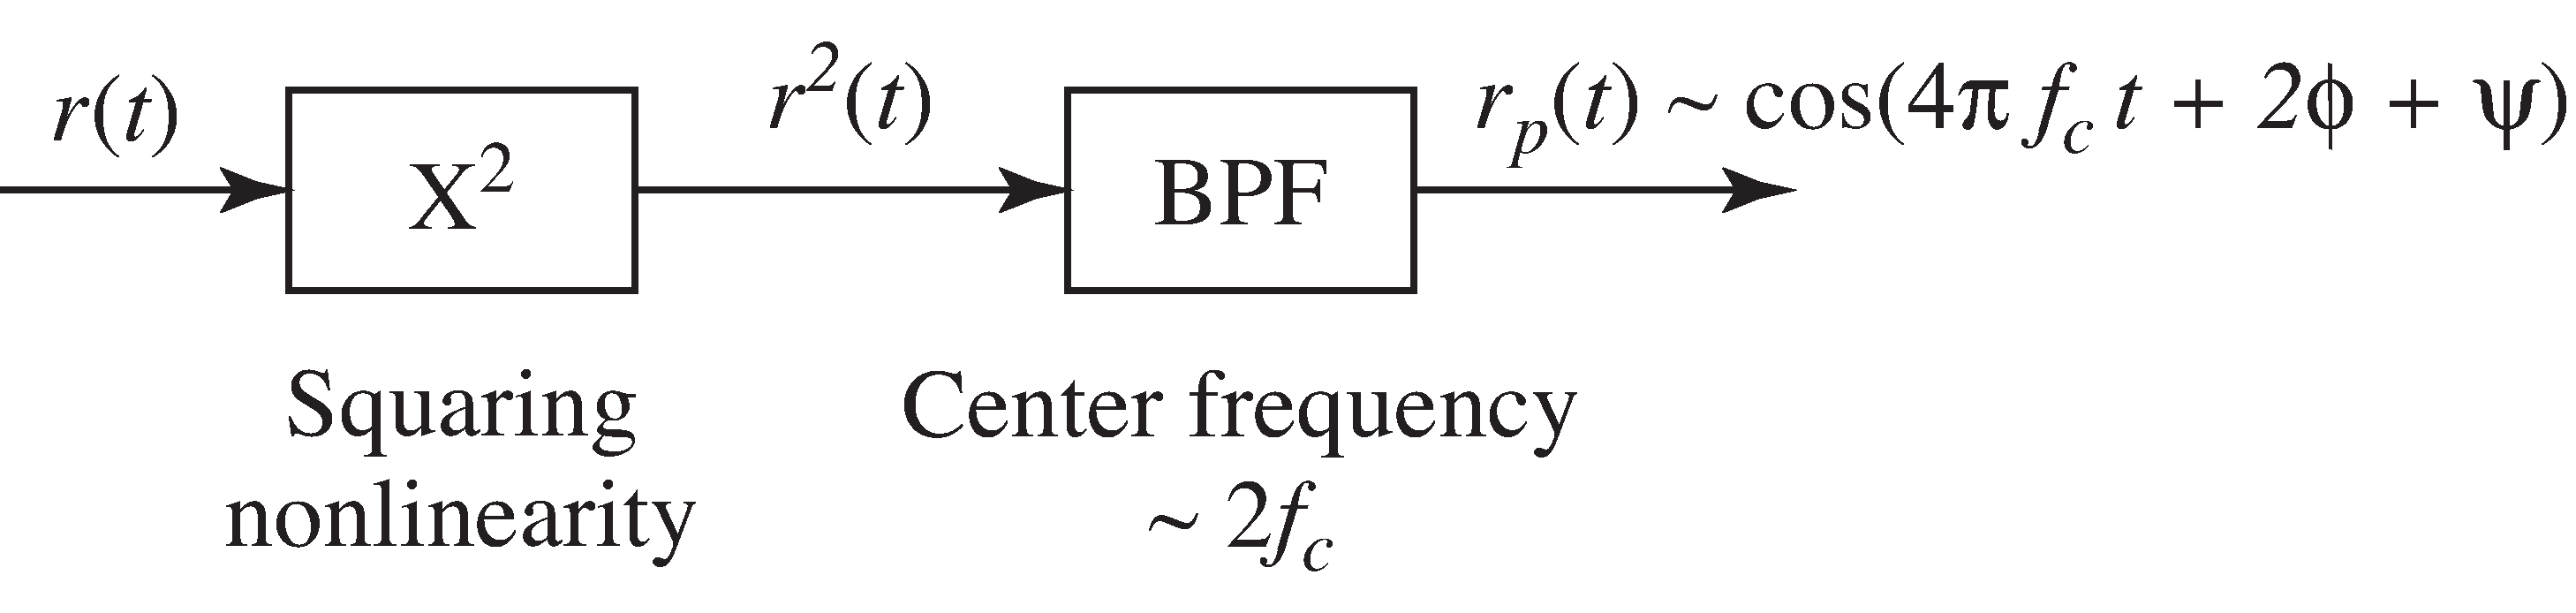 Preprocessing the input to a PLL via a squaring nonlinearity and BPF results in a sinusoidal signal at twice the frequency with a phase offset equal to twice the original plus a term introduced by the known bandpass filtering.